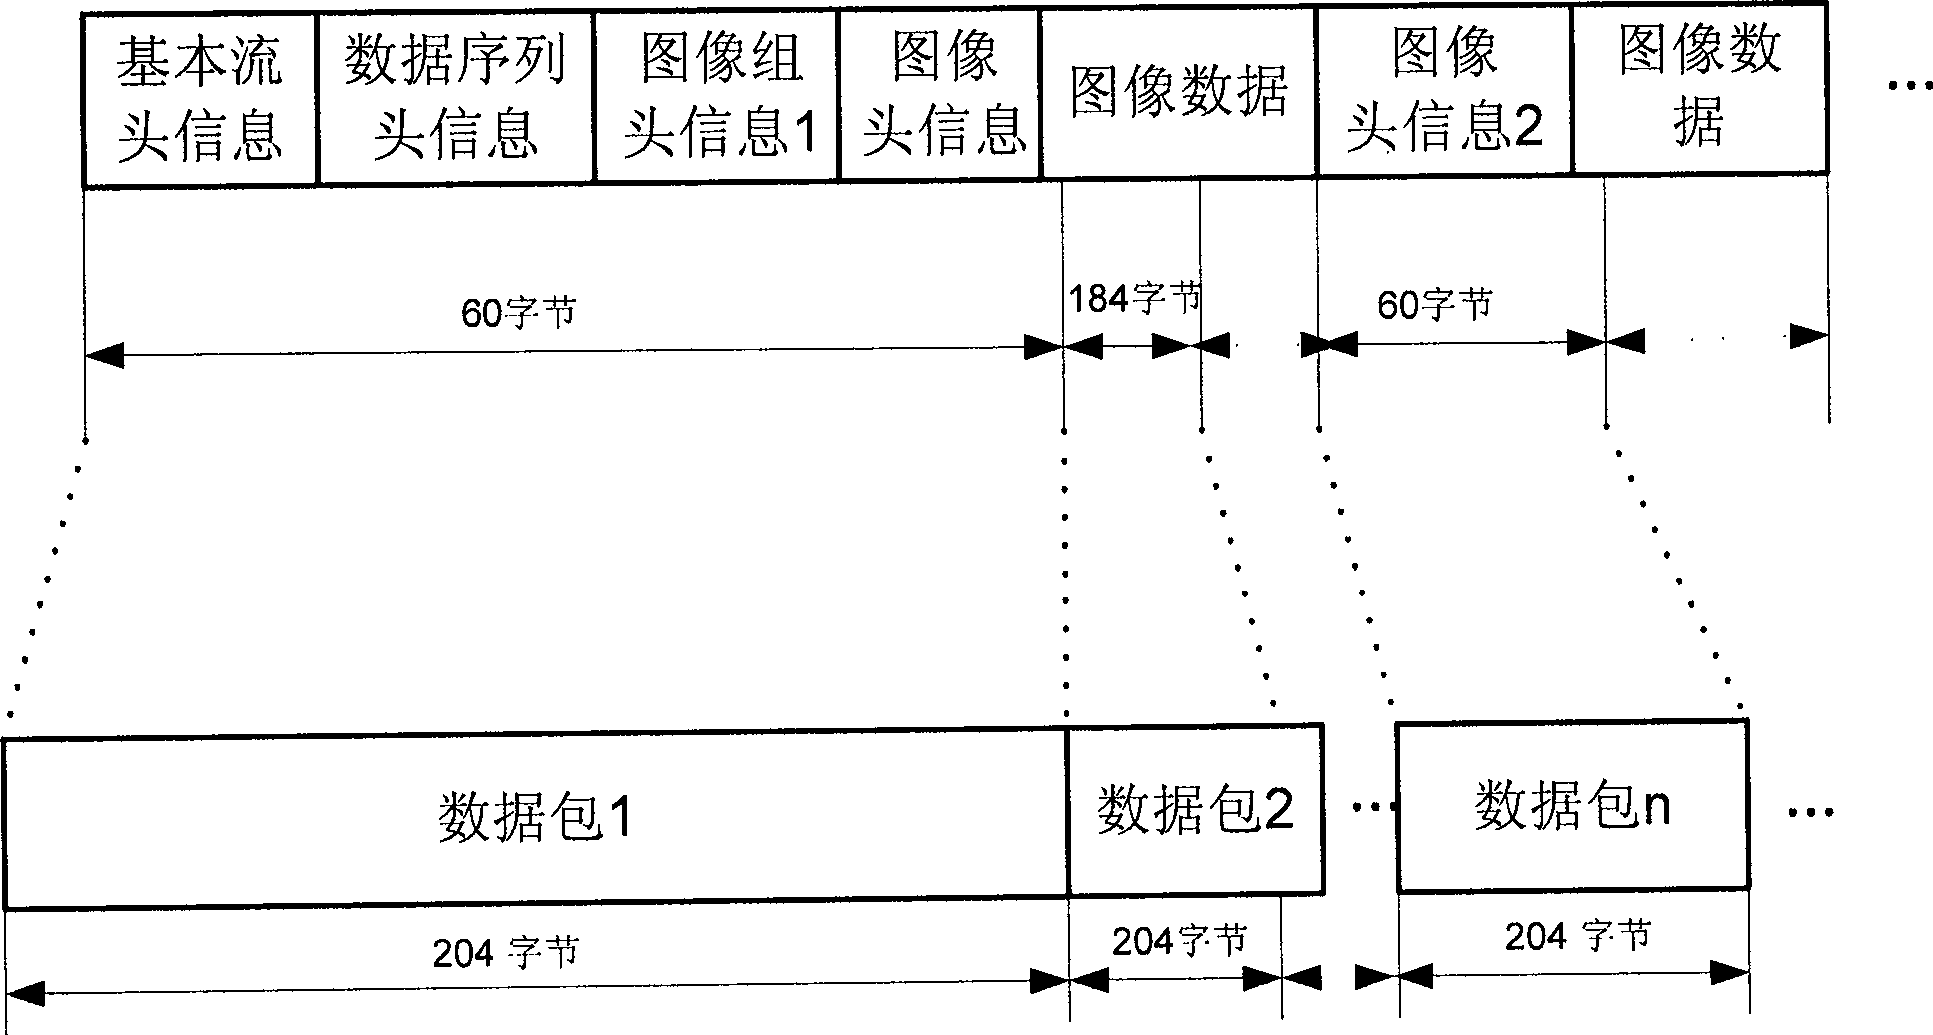 Method and apparatus for encoding and decoding data with error correction